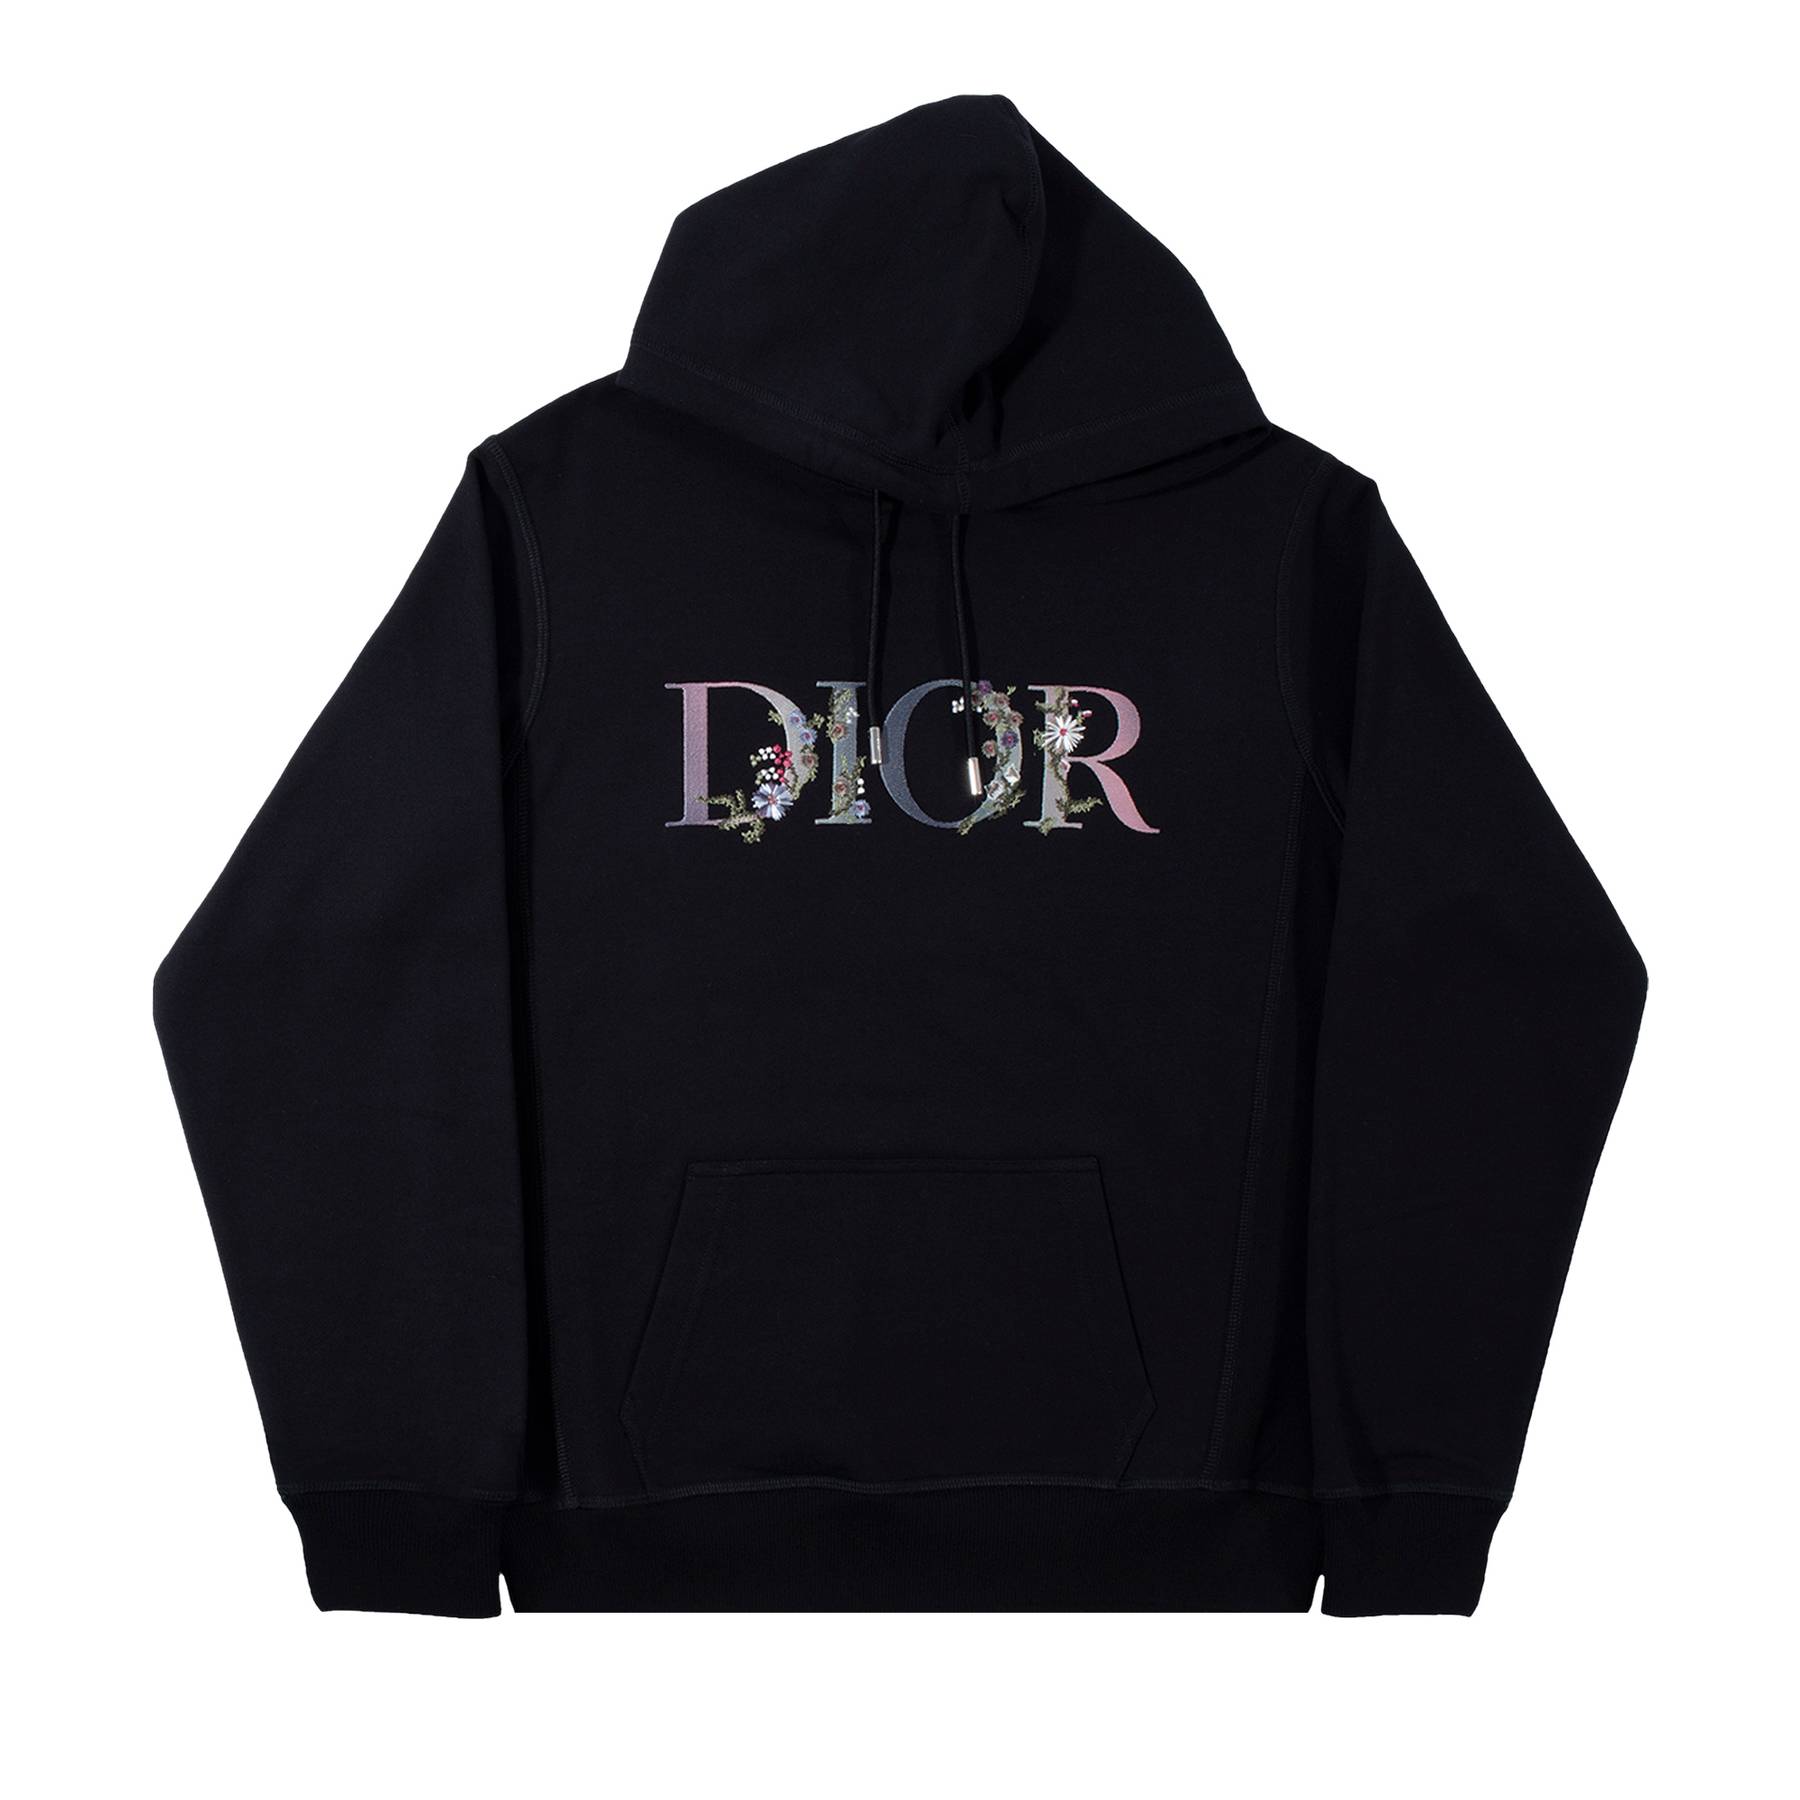 Dior Flowers Embroidered Hoodie 'Black' - Dior - 113J688A0531 C984 | GOAT